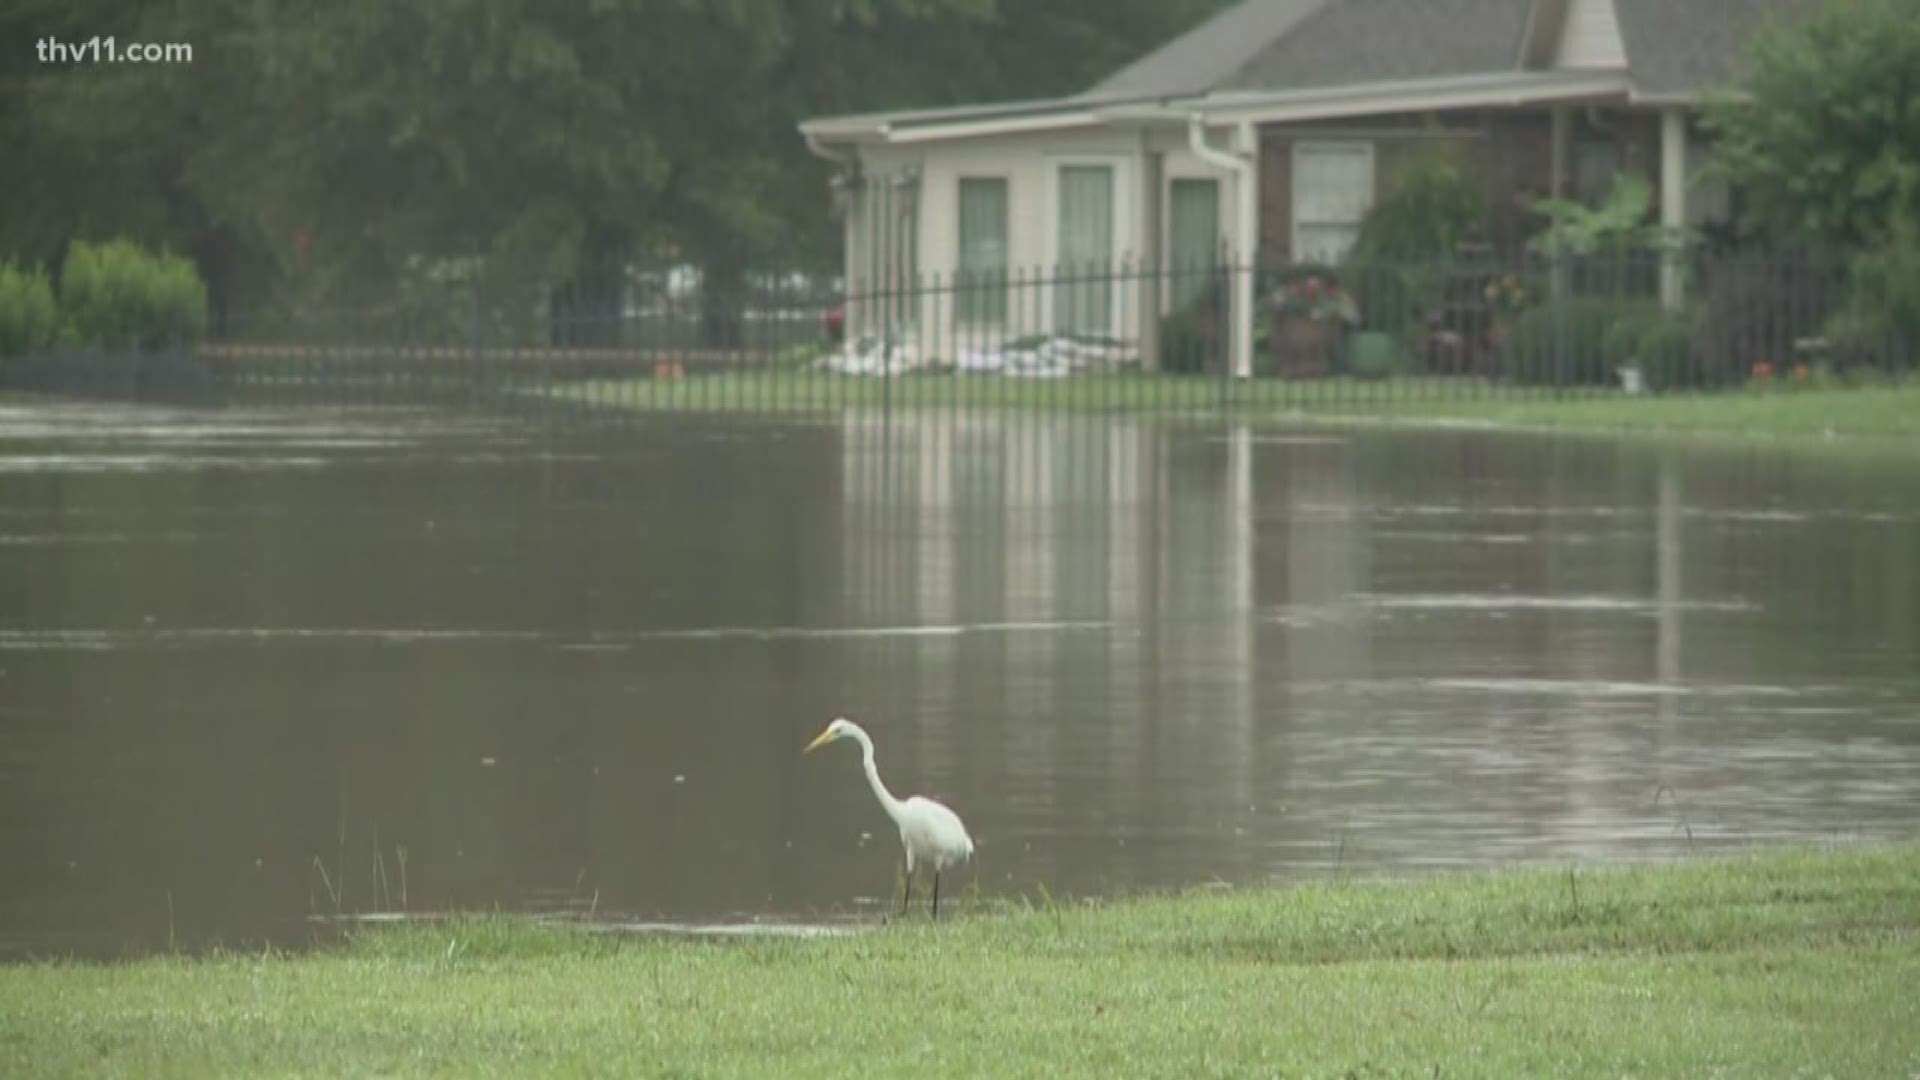 It'll be weeks before the water recedes to its normal level in Pine Bluff, and that'll put pressure on the levee system, creating some concerns.